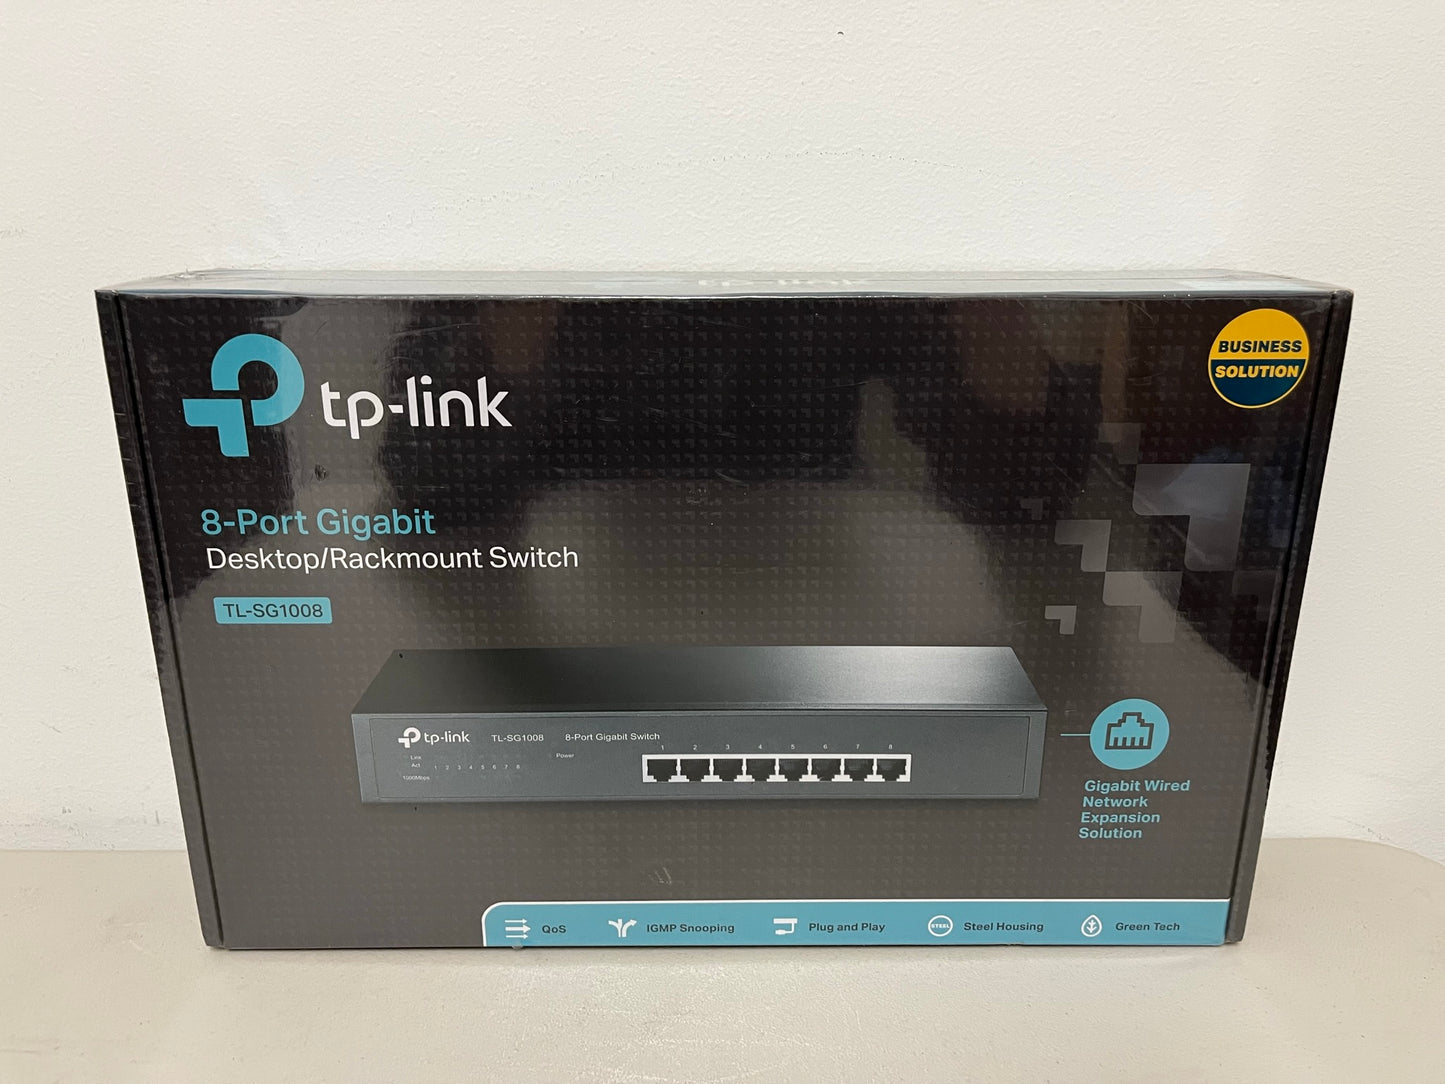 New tp-link TL-SG1008 & Linksys PSUS4 PrintServer for Sale.  We Sell Professional Audio Equipment. Audio Systems, Amplifiers, Consoles, Mixers, Electronics, Entertainment, Sound, Live.